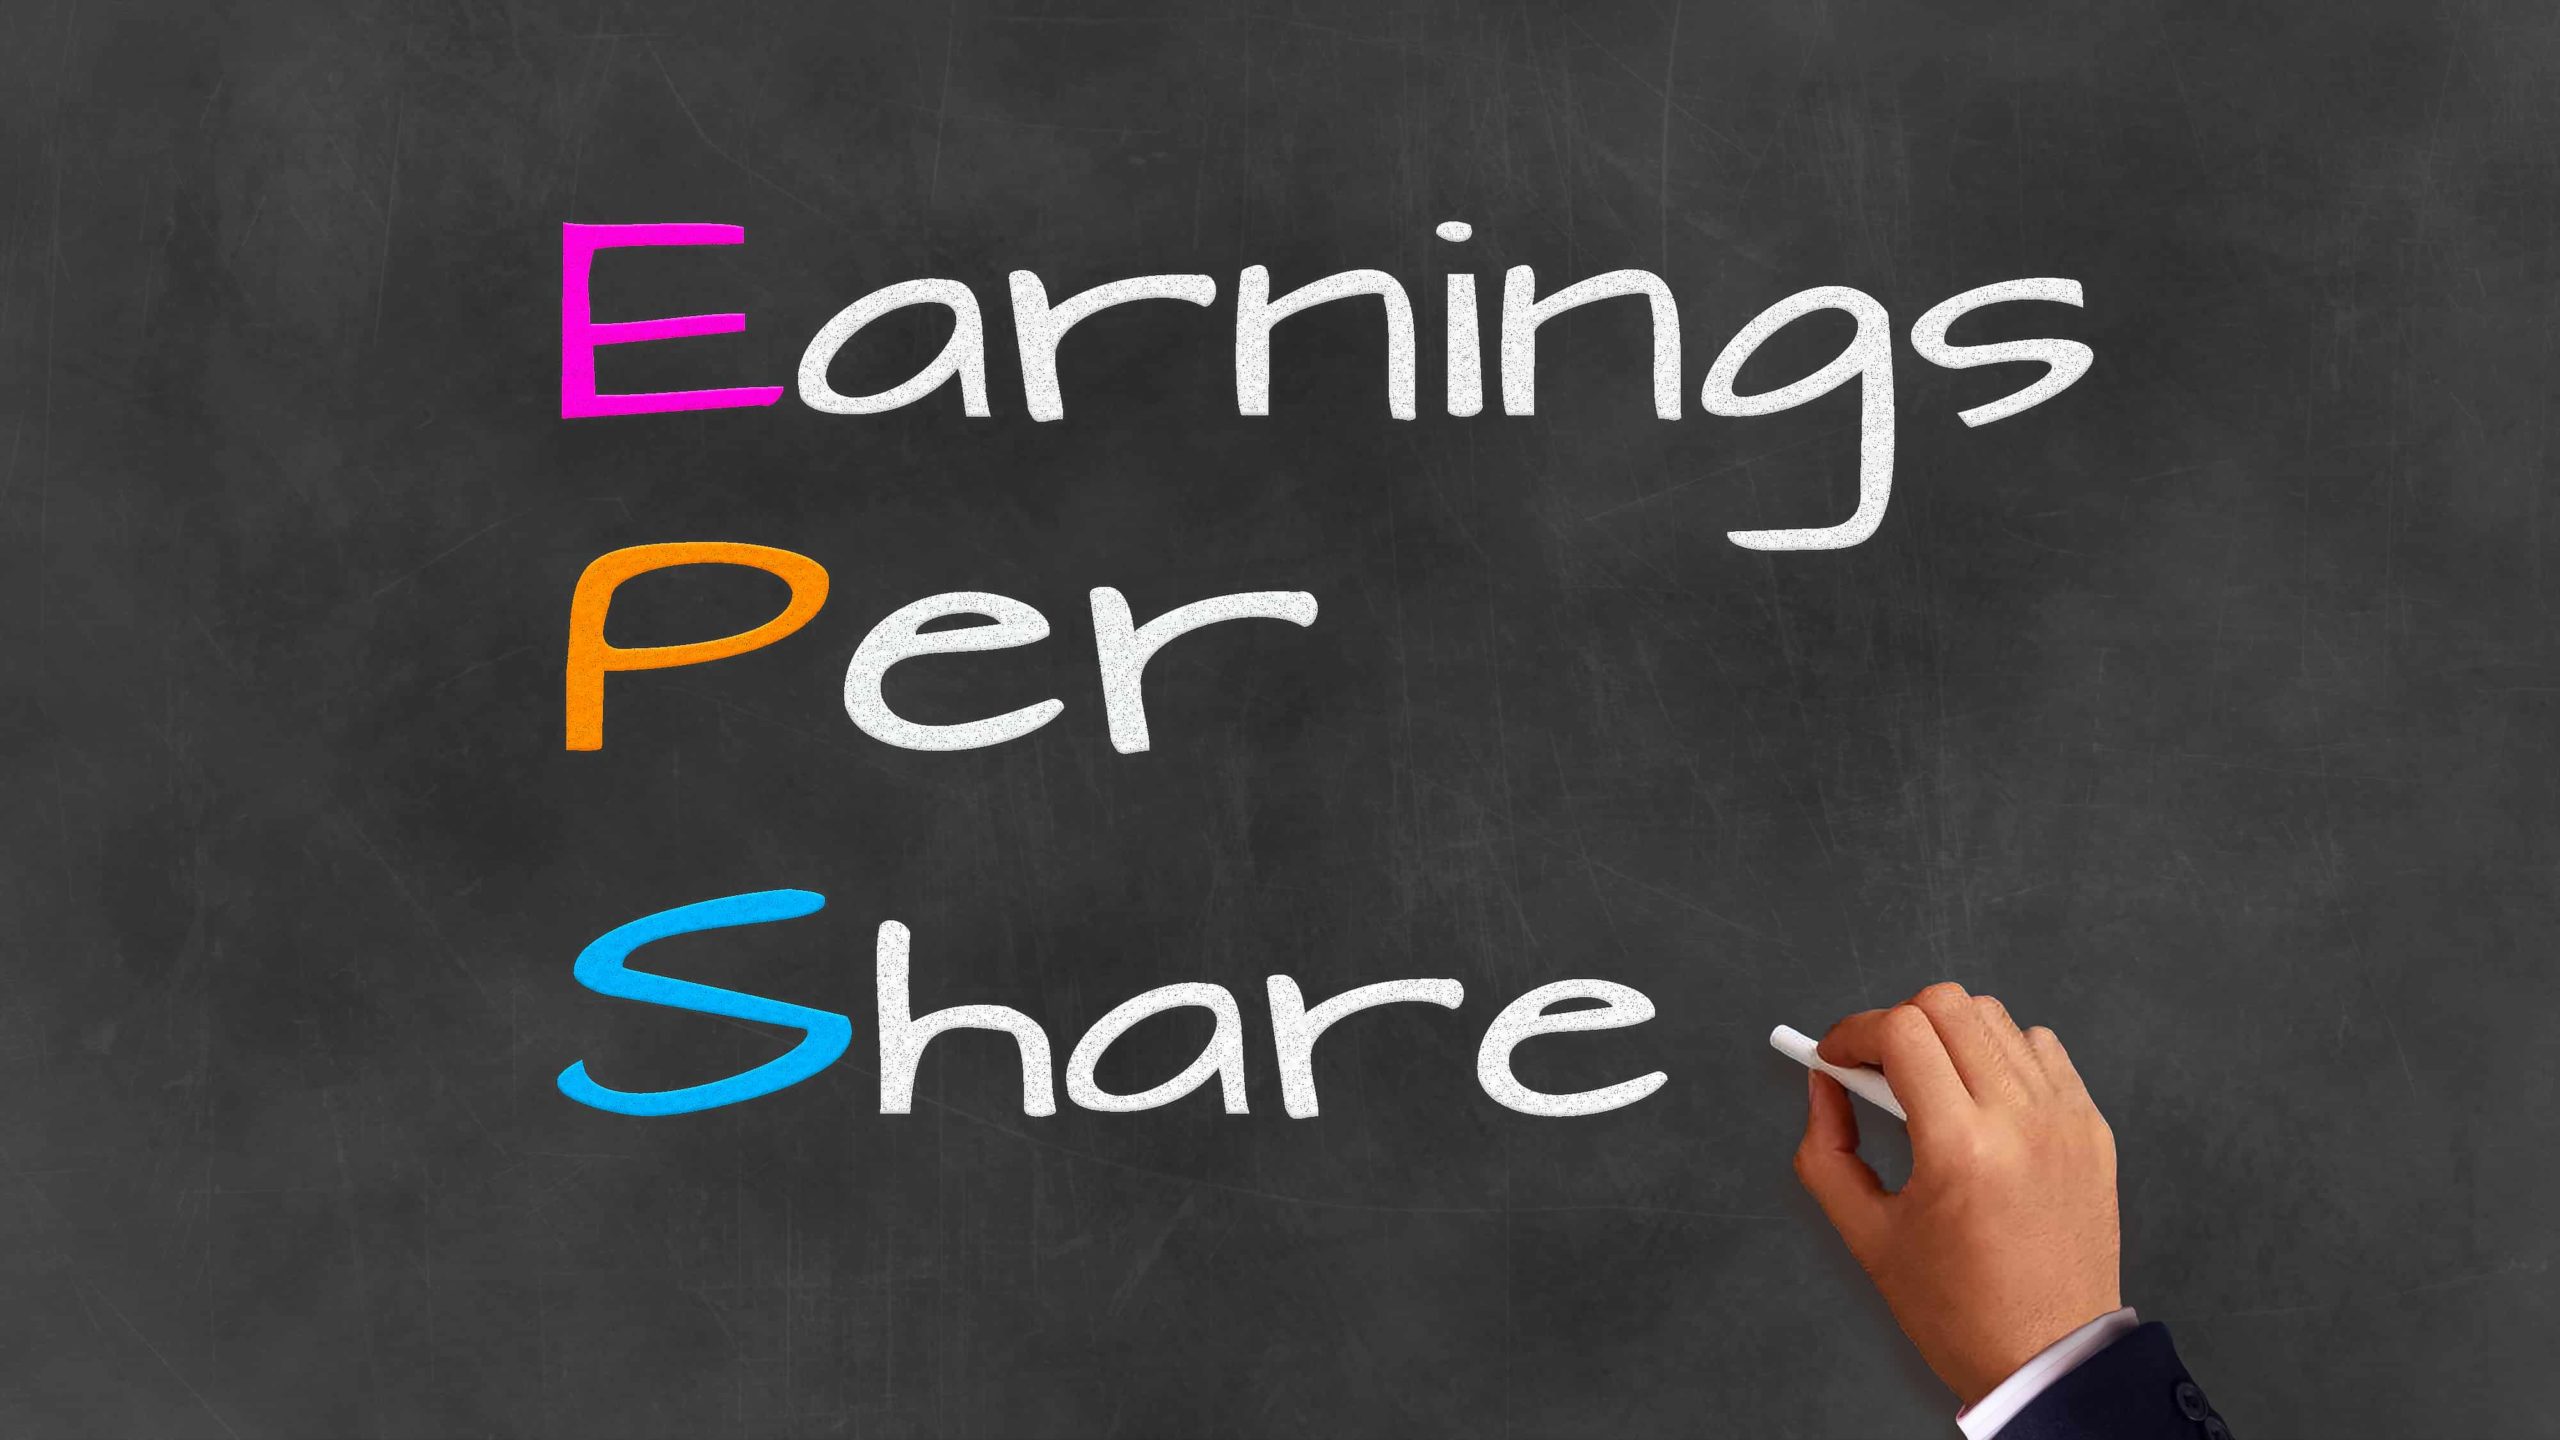 Acronym and coprate sayings on chalkboard - "E.P.S" Earnings Per Share